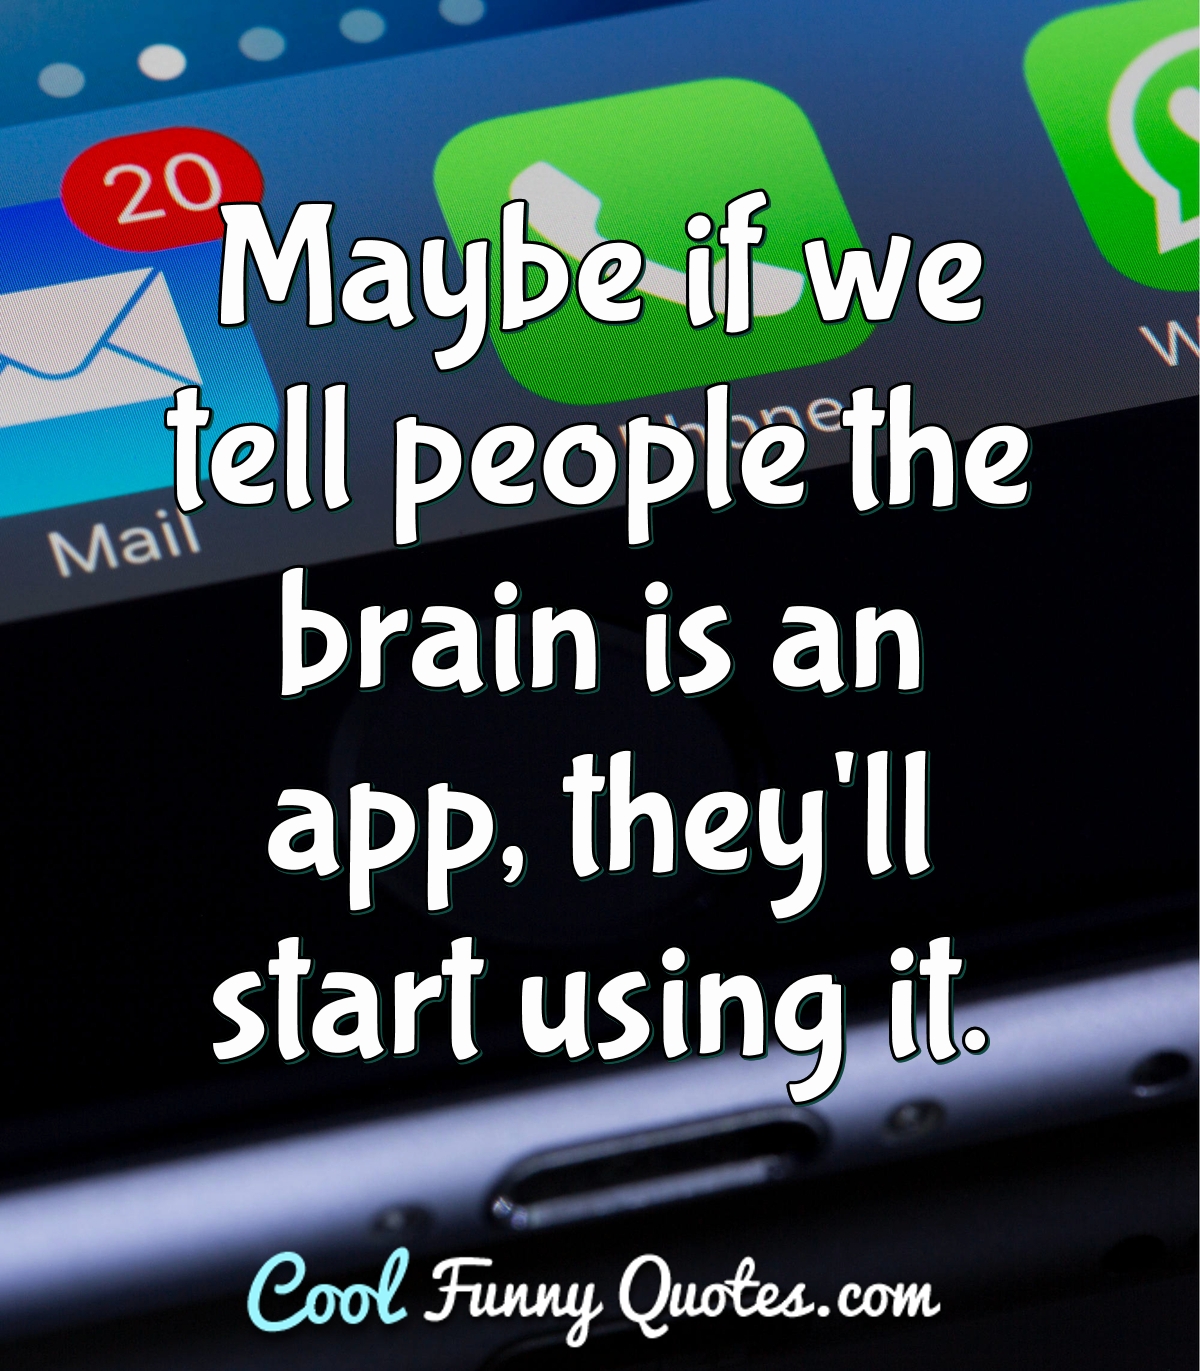 Maybe if we tell people the brain is an app, they'll start using it. - Anonymous